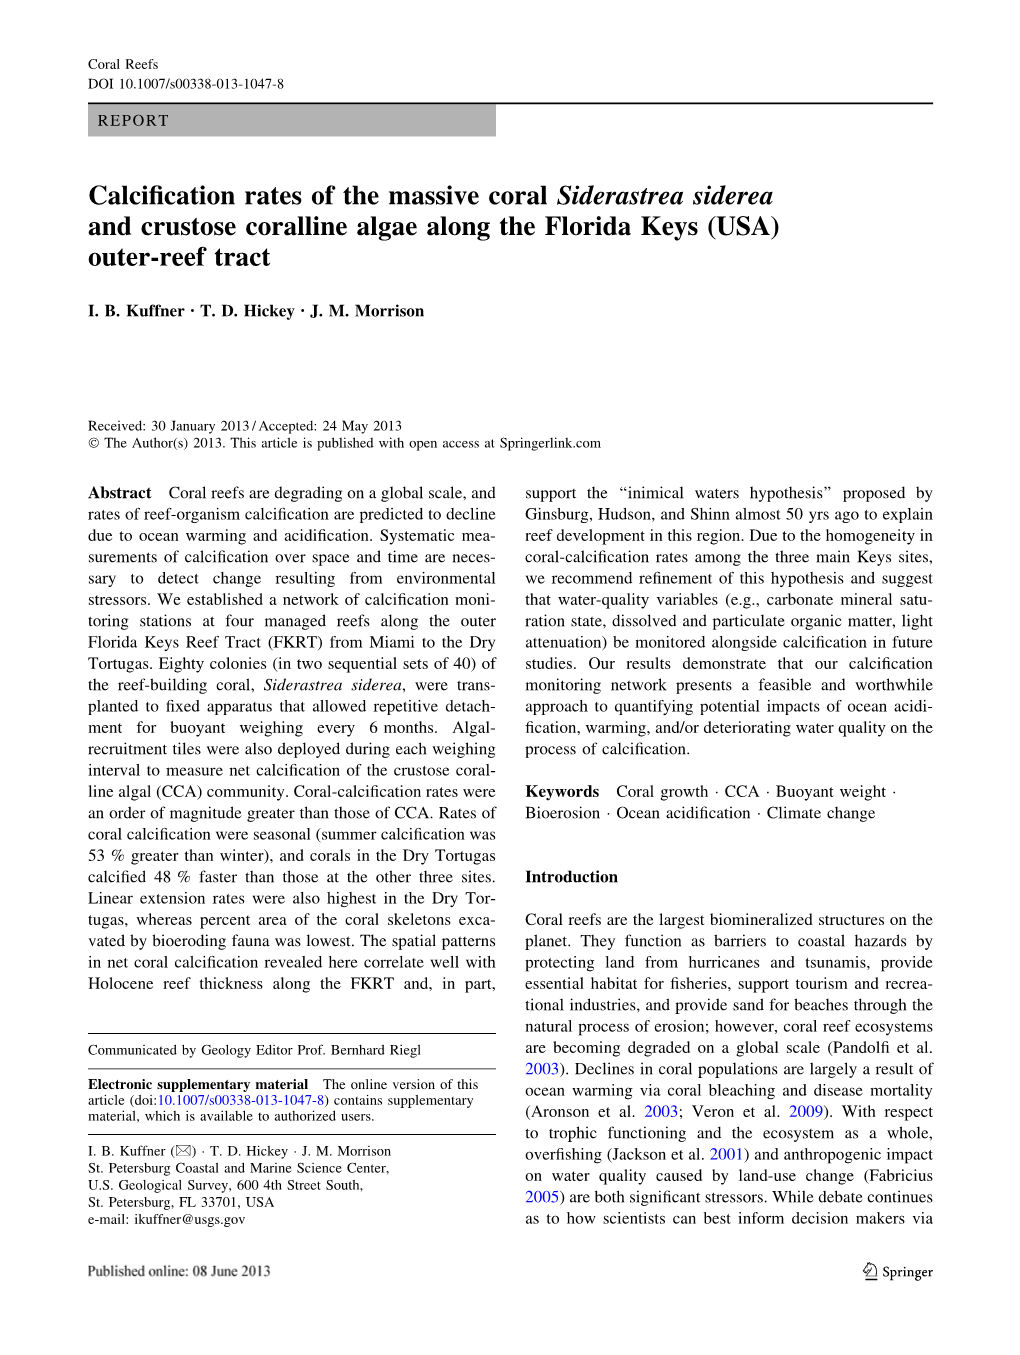 Calcification Rates of the Massive Coral Siderastrea Siderea and Crustose